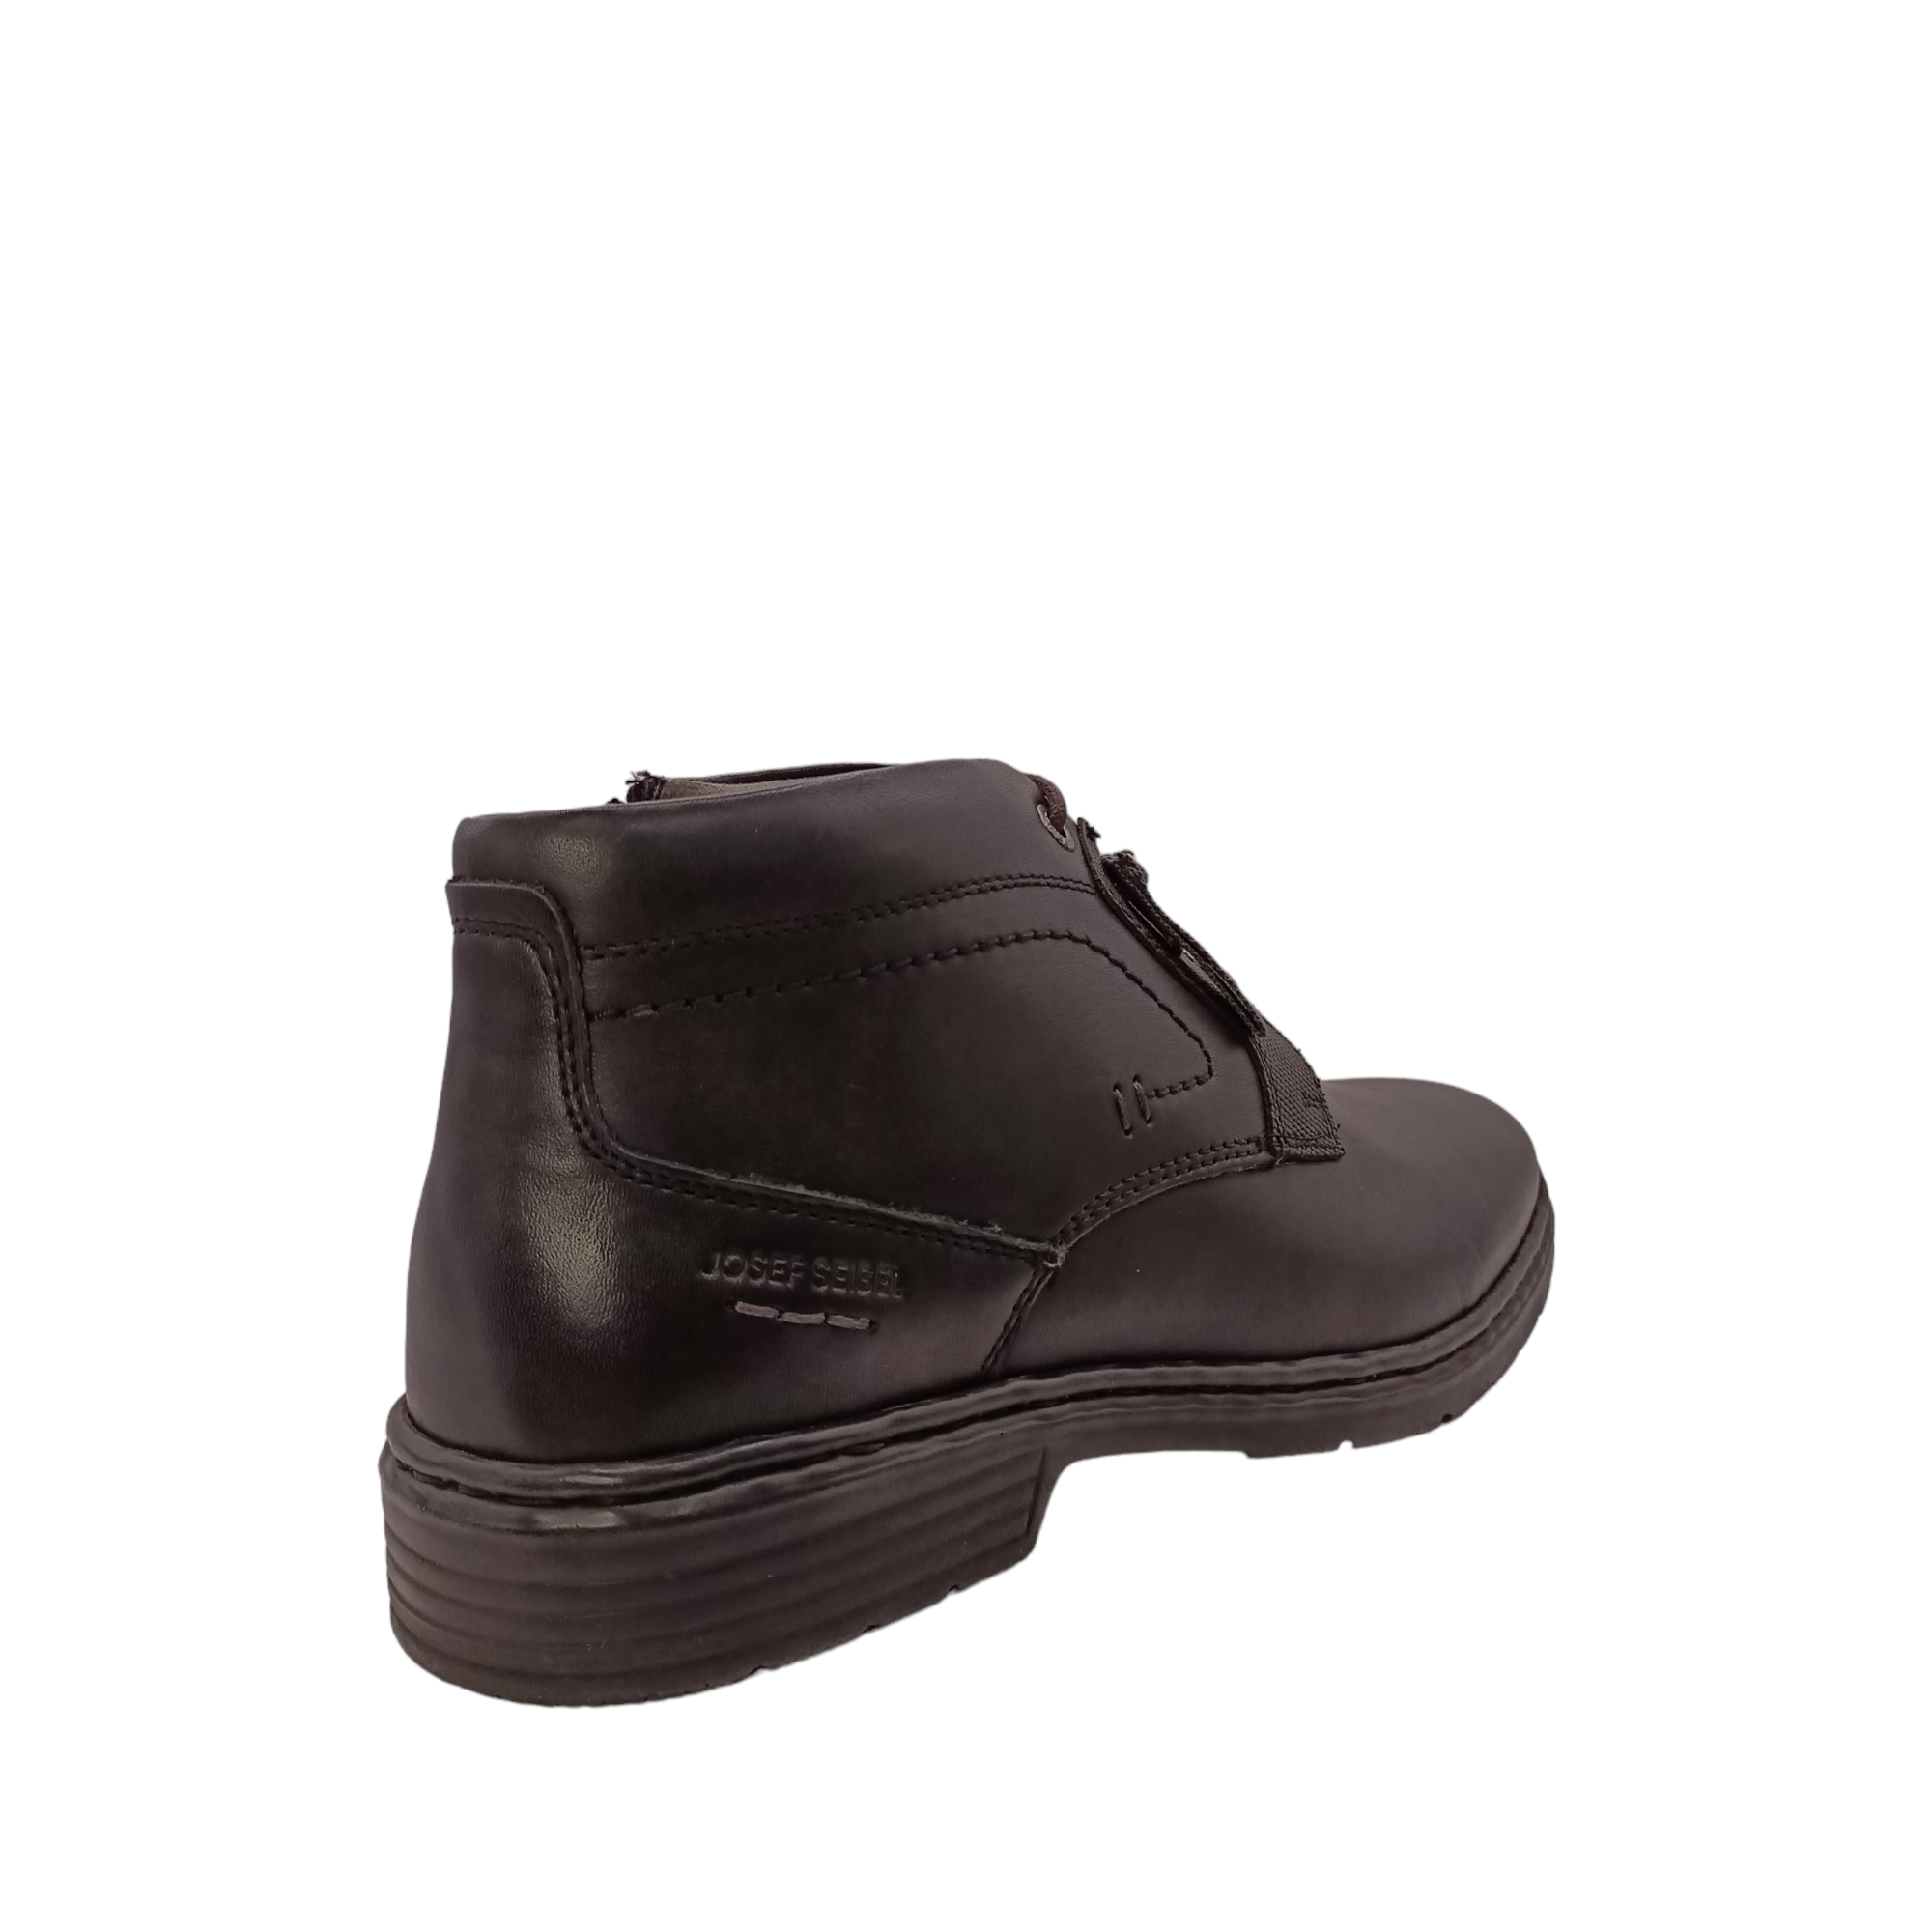 Back view of Black Anvers 17 Josef Seibel boot. Hand stitched details with laces up front and a side zip on the inner side of boot. Shop Mens Boots online and in-store with shoe&amp;me Mount Maunganui Tauranga.